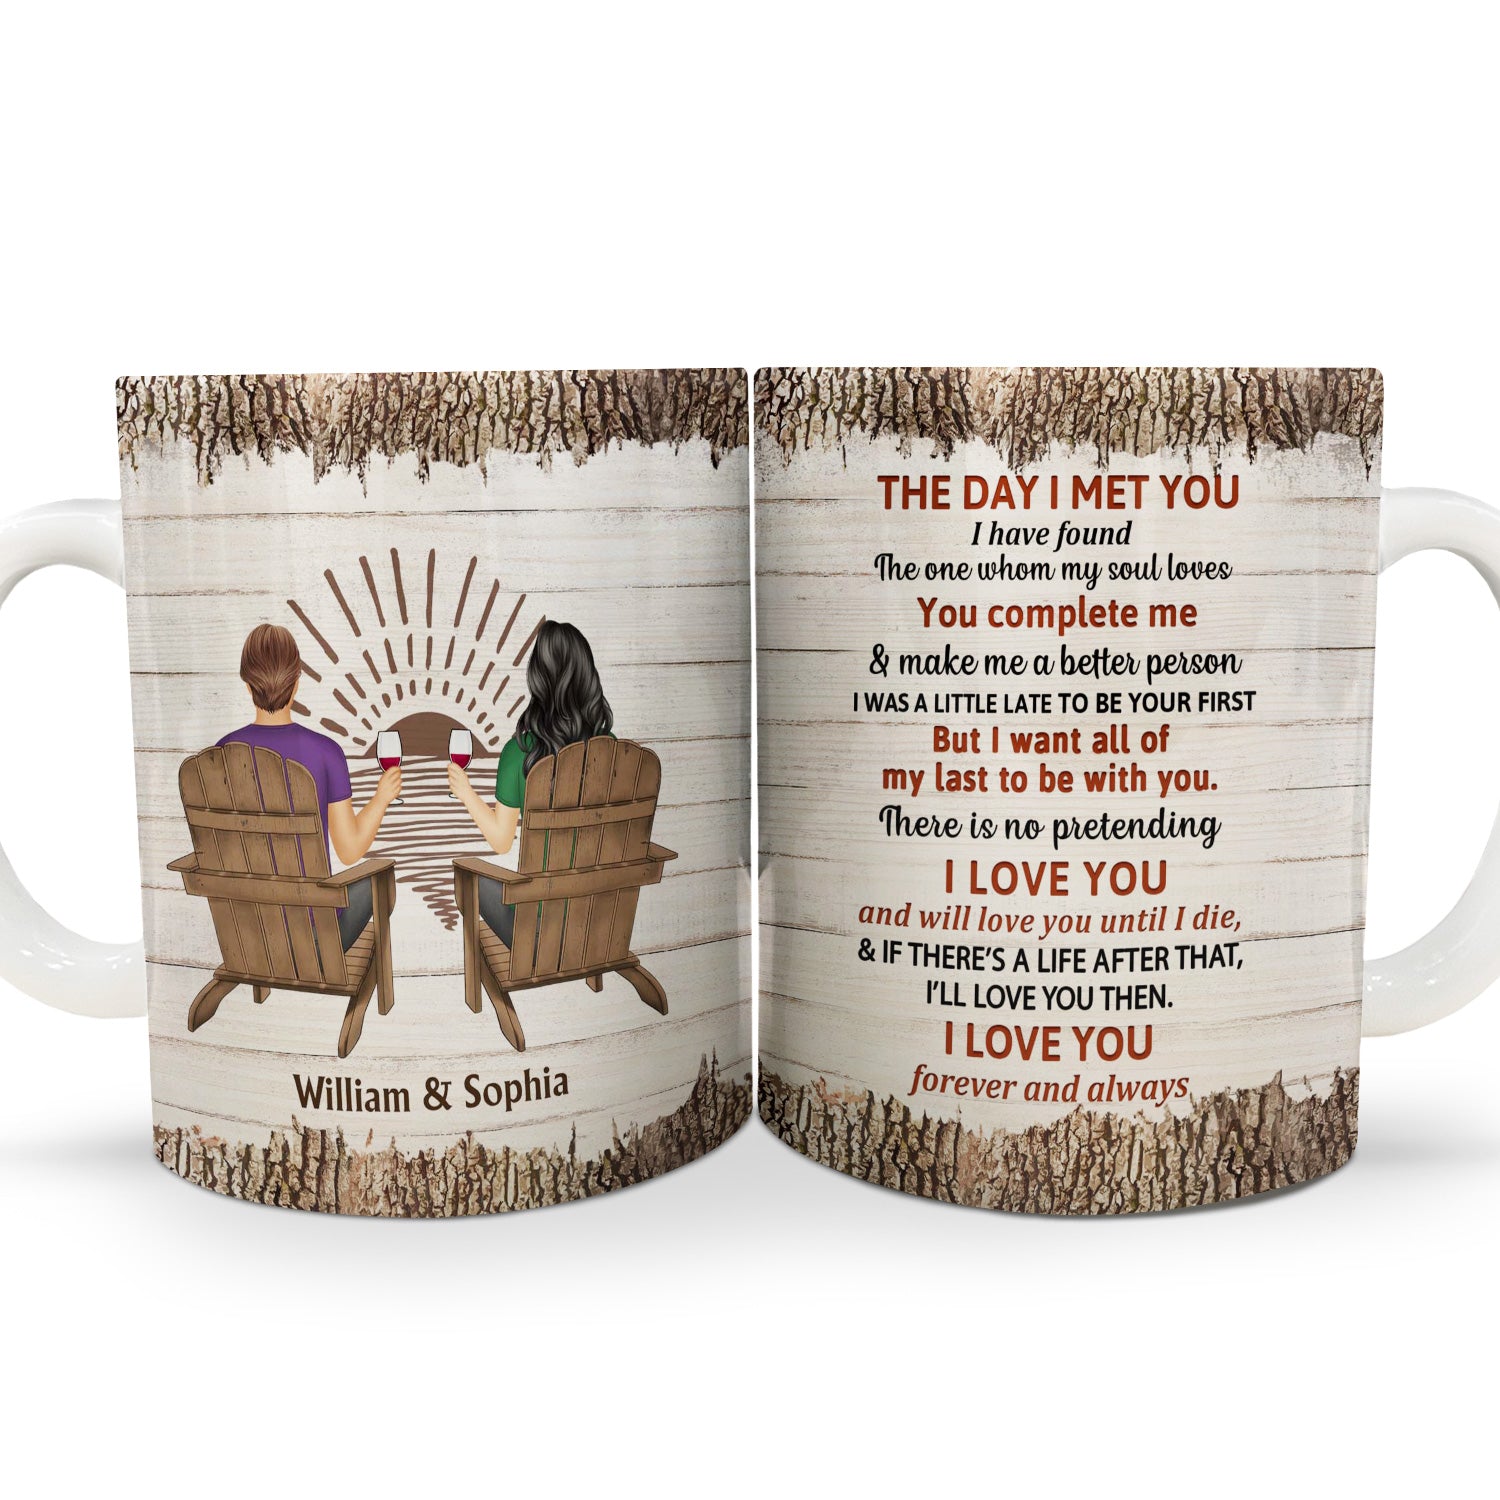 I Love You The Most - Unique Birthday Gifts, Wedding Anniversary - Personalized White Edge-to-Edge Mug